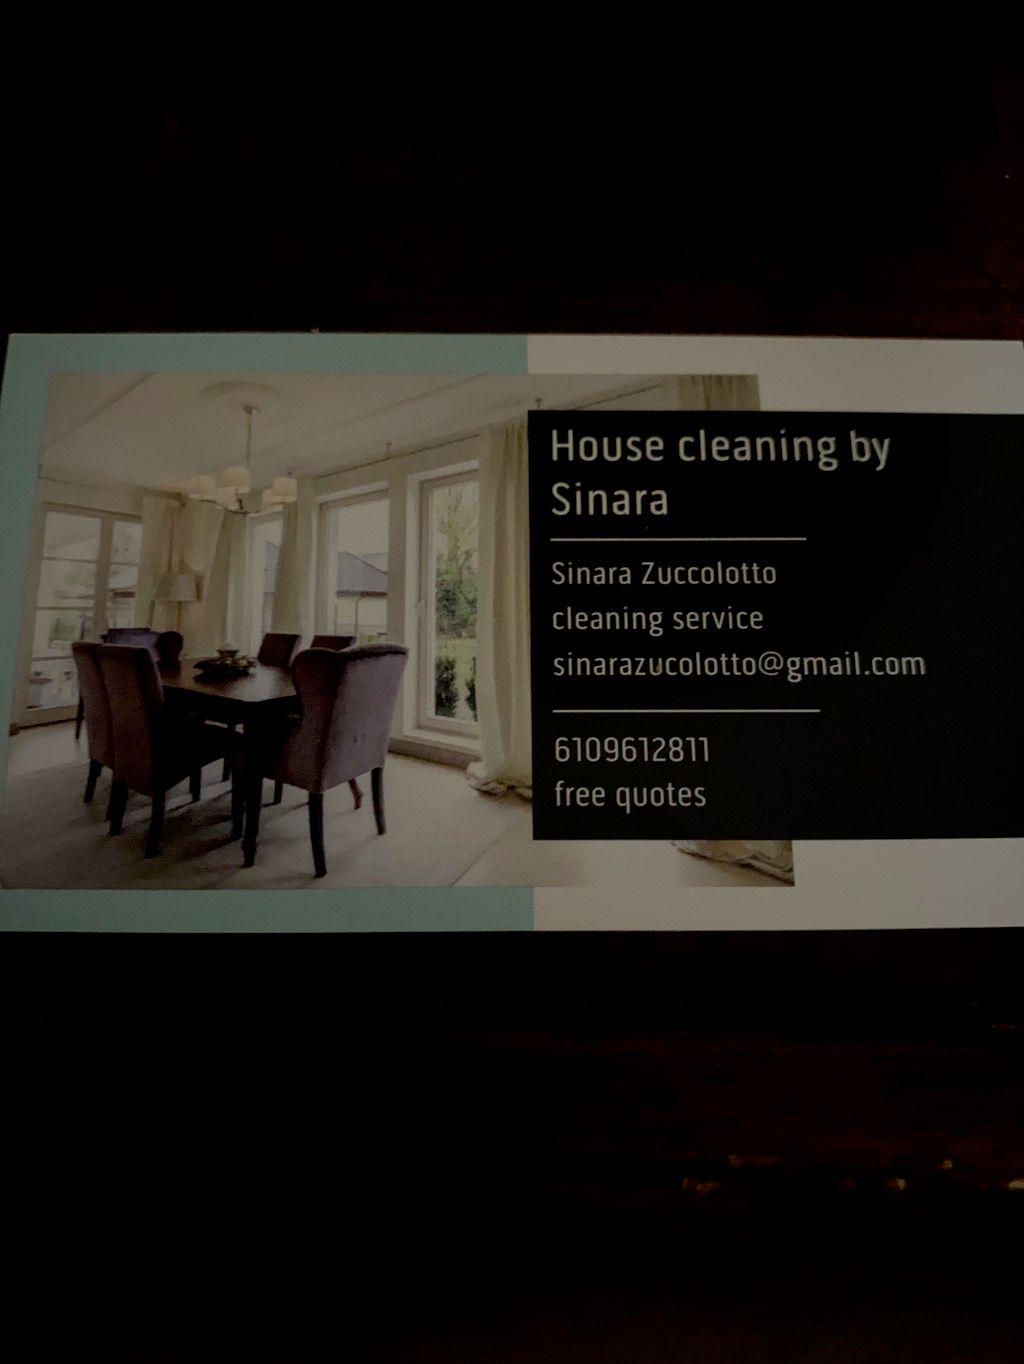 House cleaning by Sinara